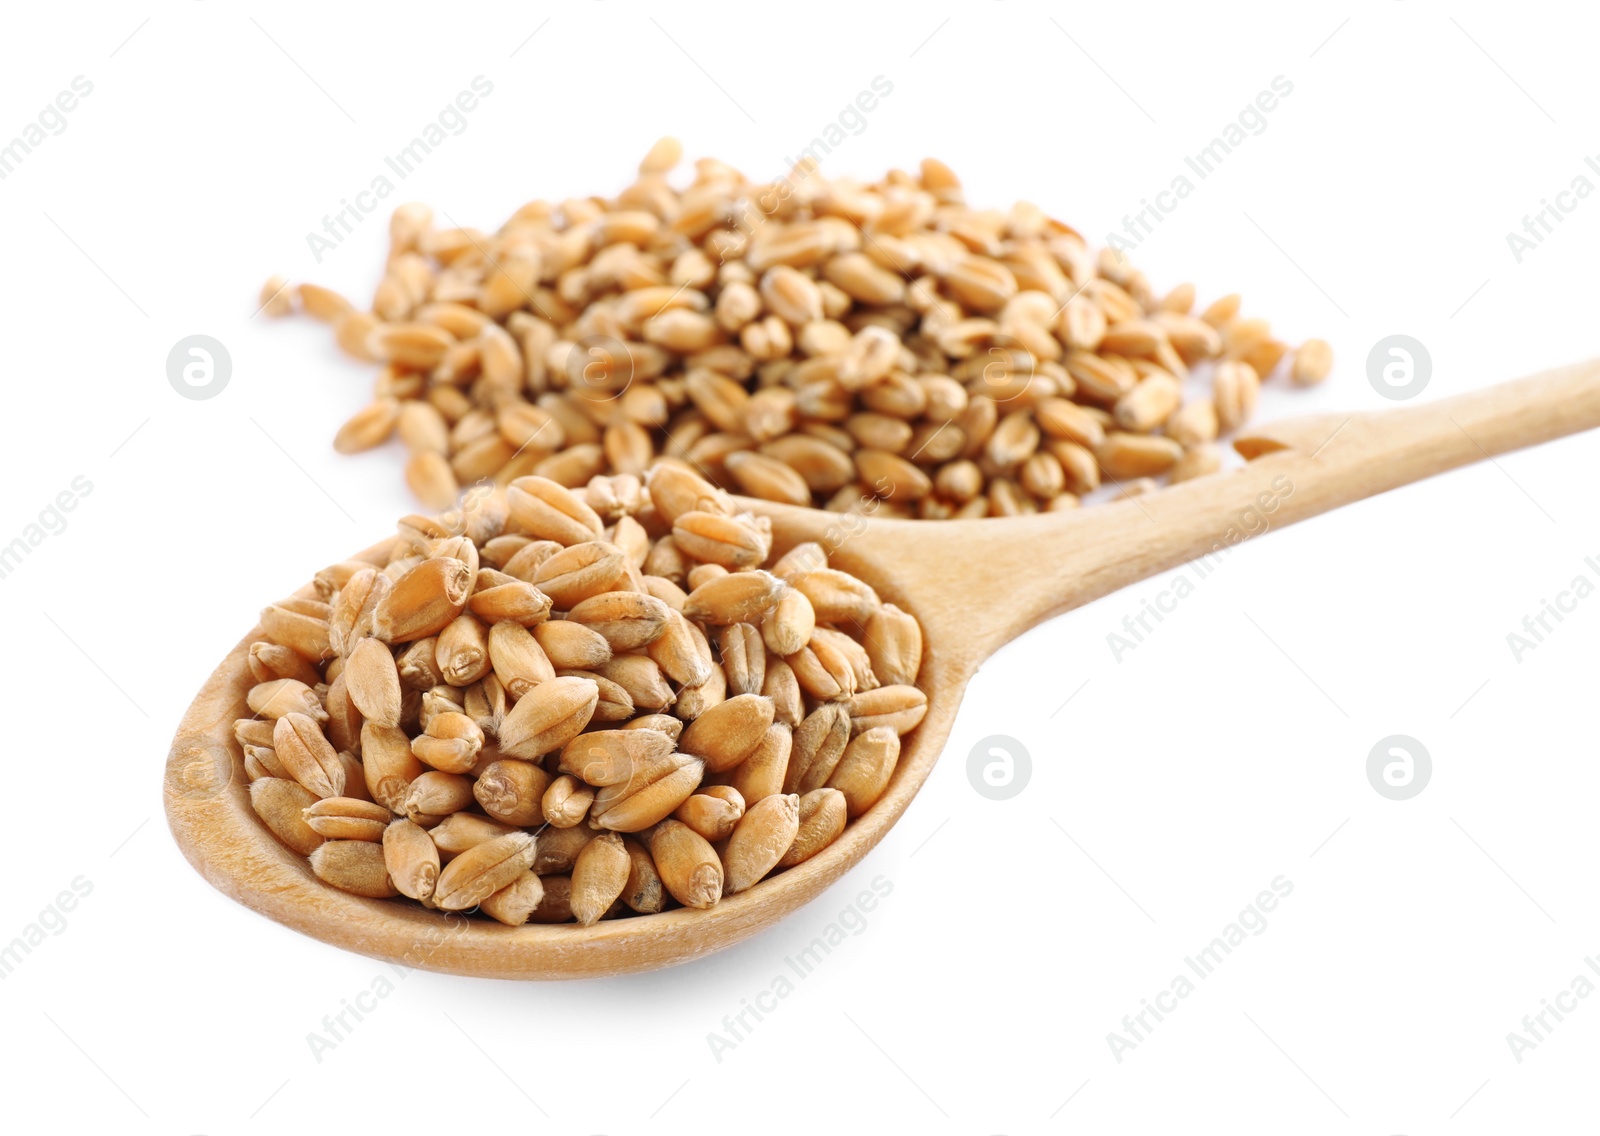 Photo of Wooden spoon with wheat grains on white background